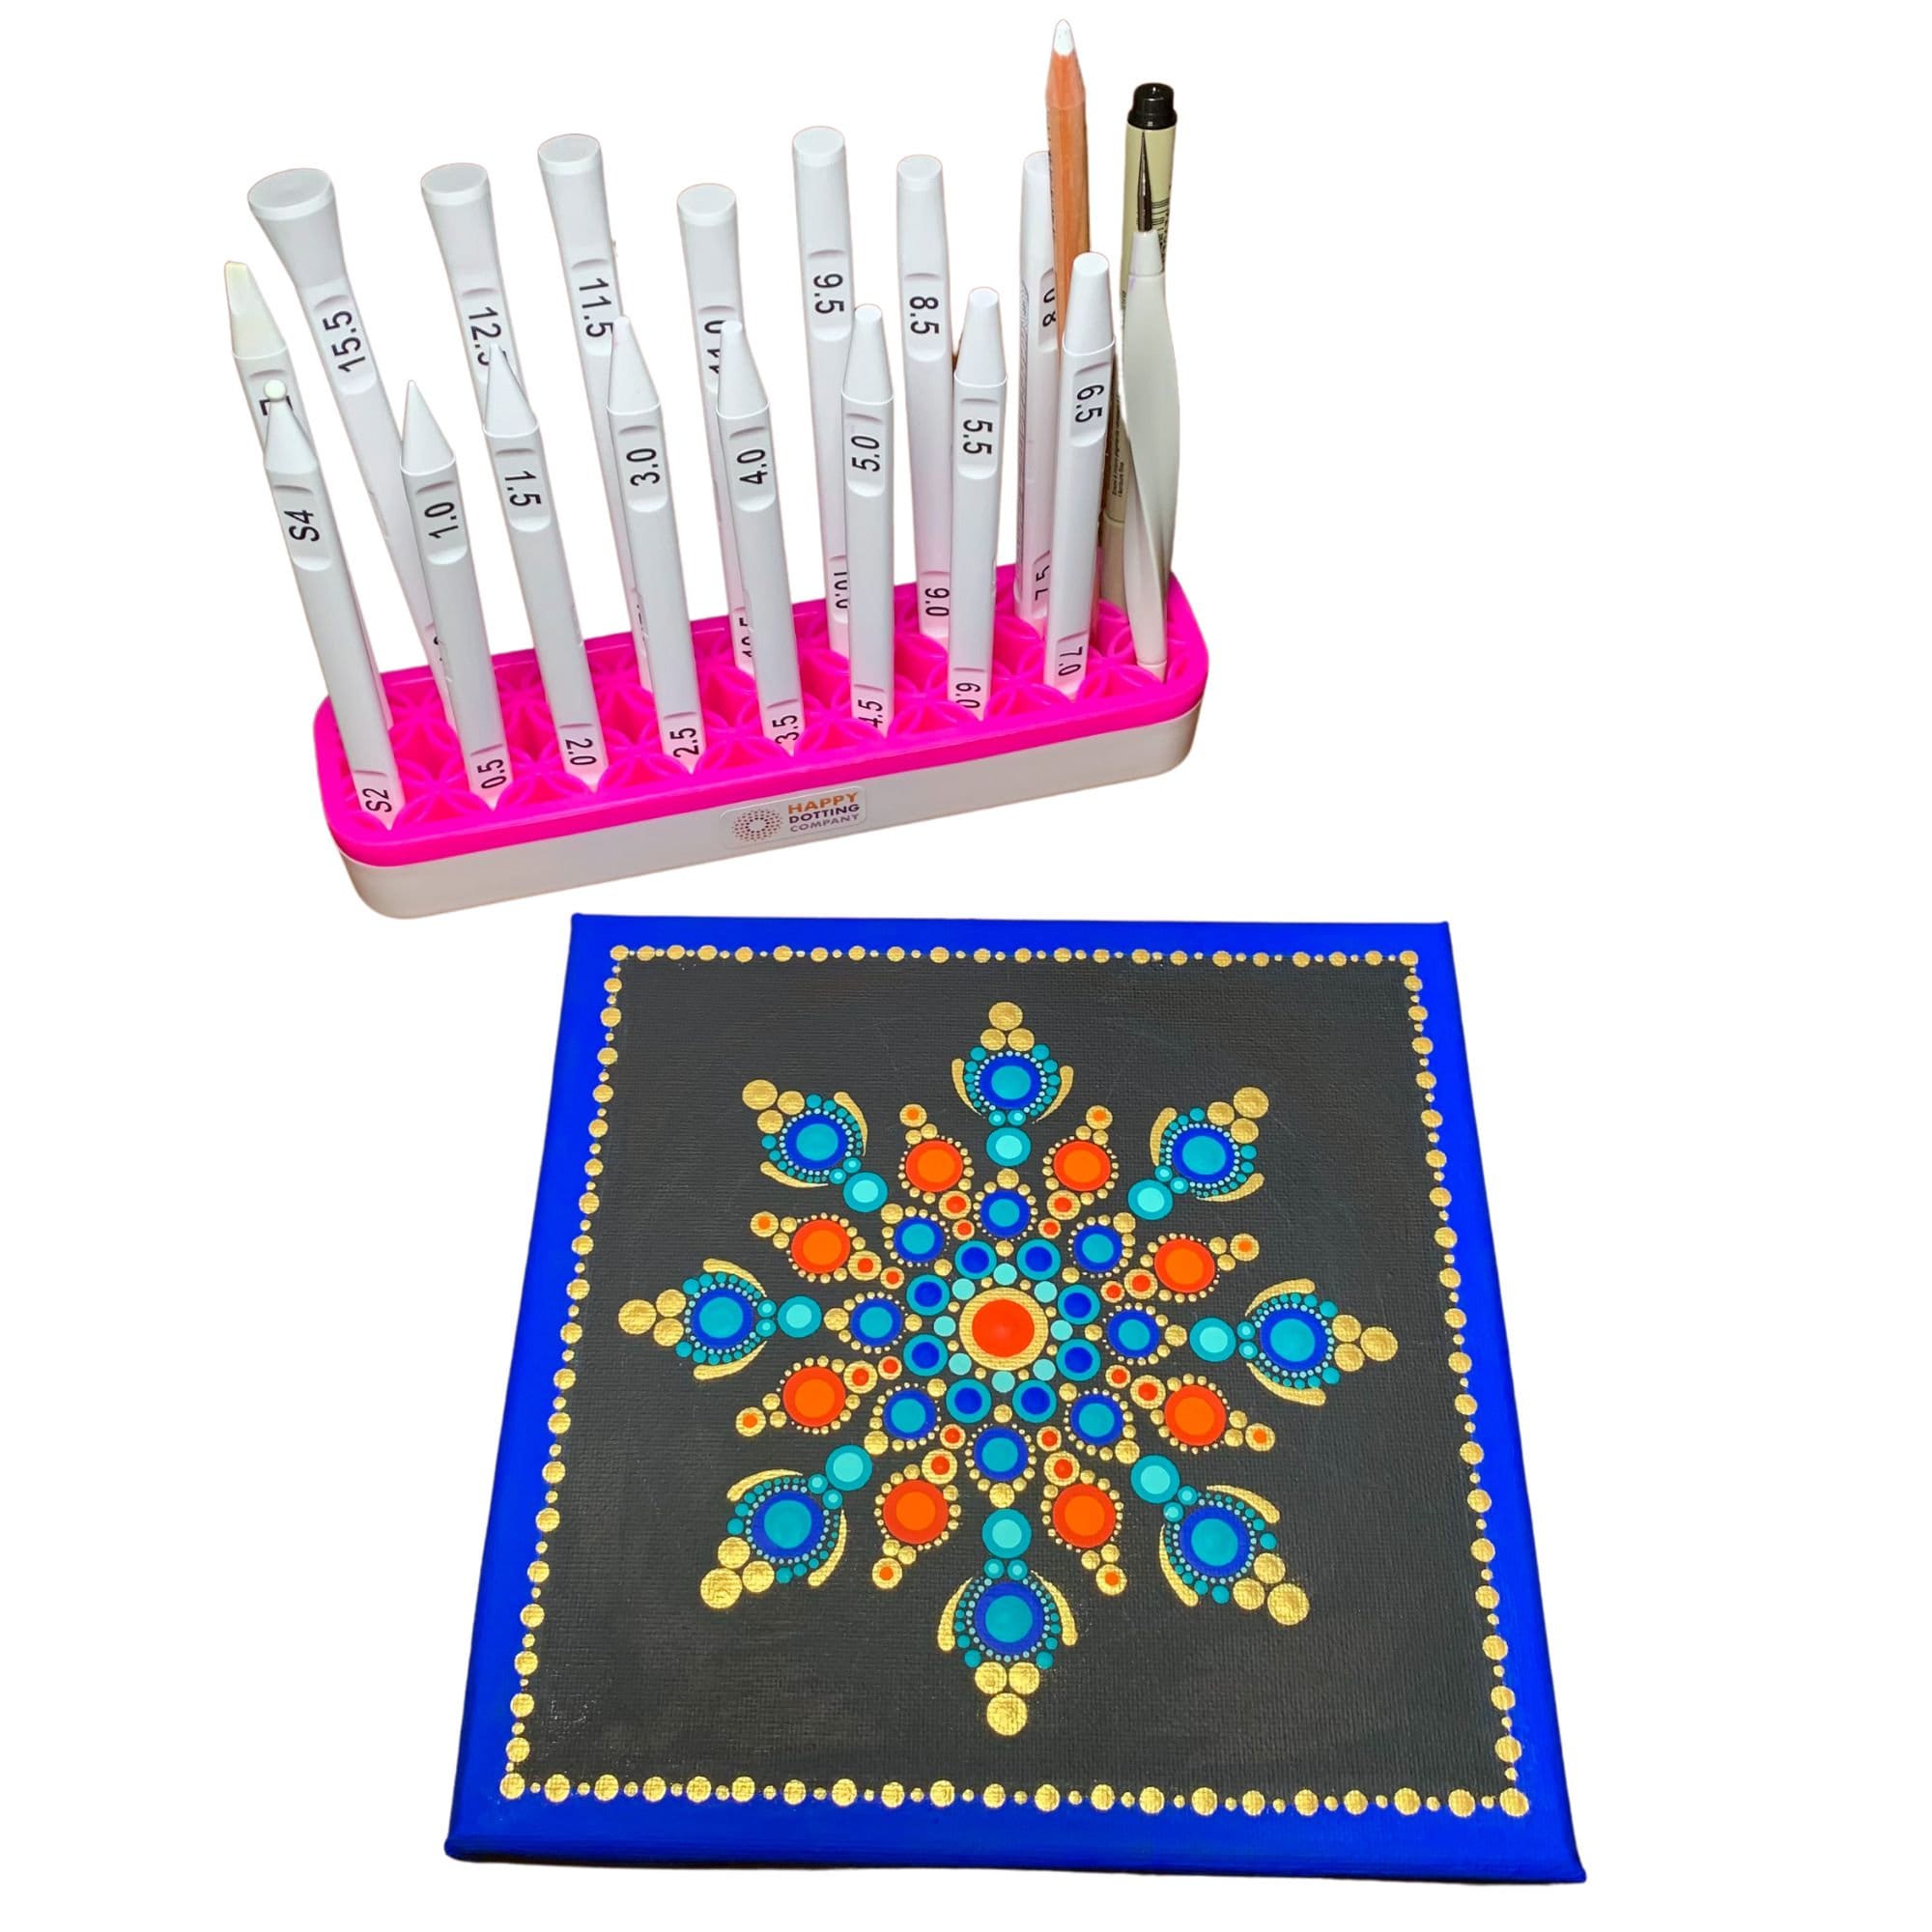 WOSKY 31 pieces mandala dotting tools set - professional supplies tools  kits, include mini easel, paint tray